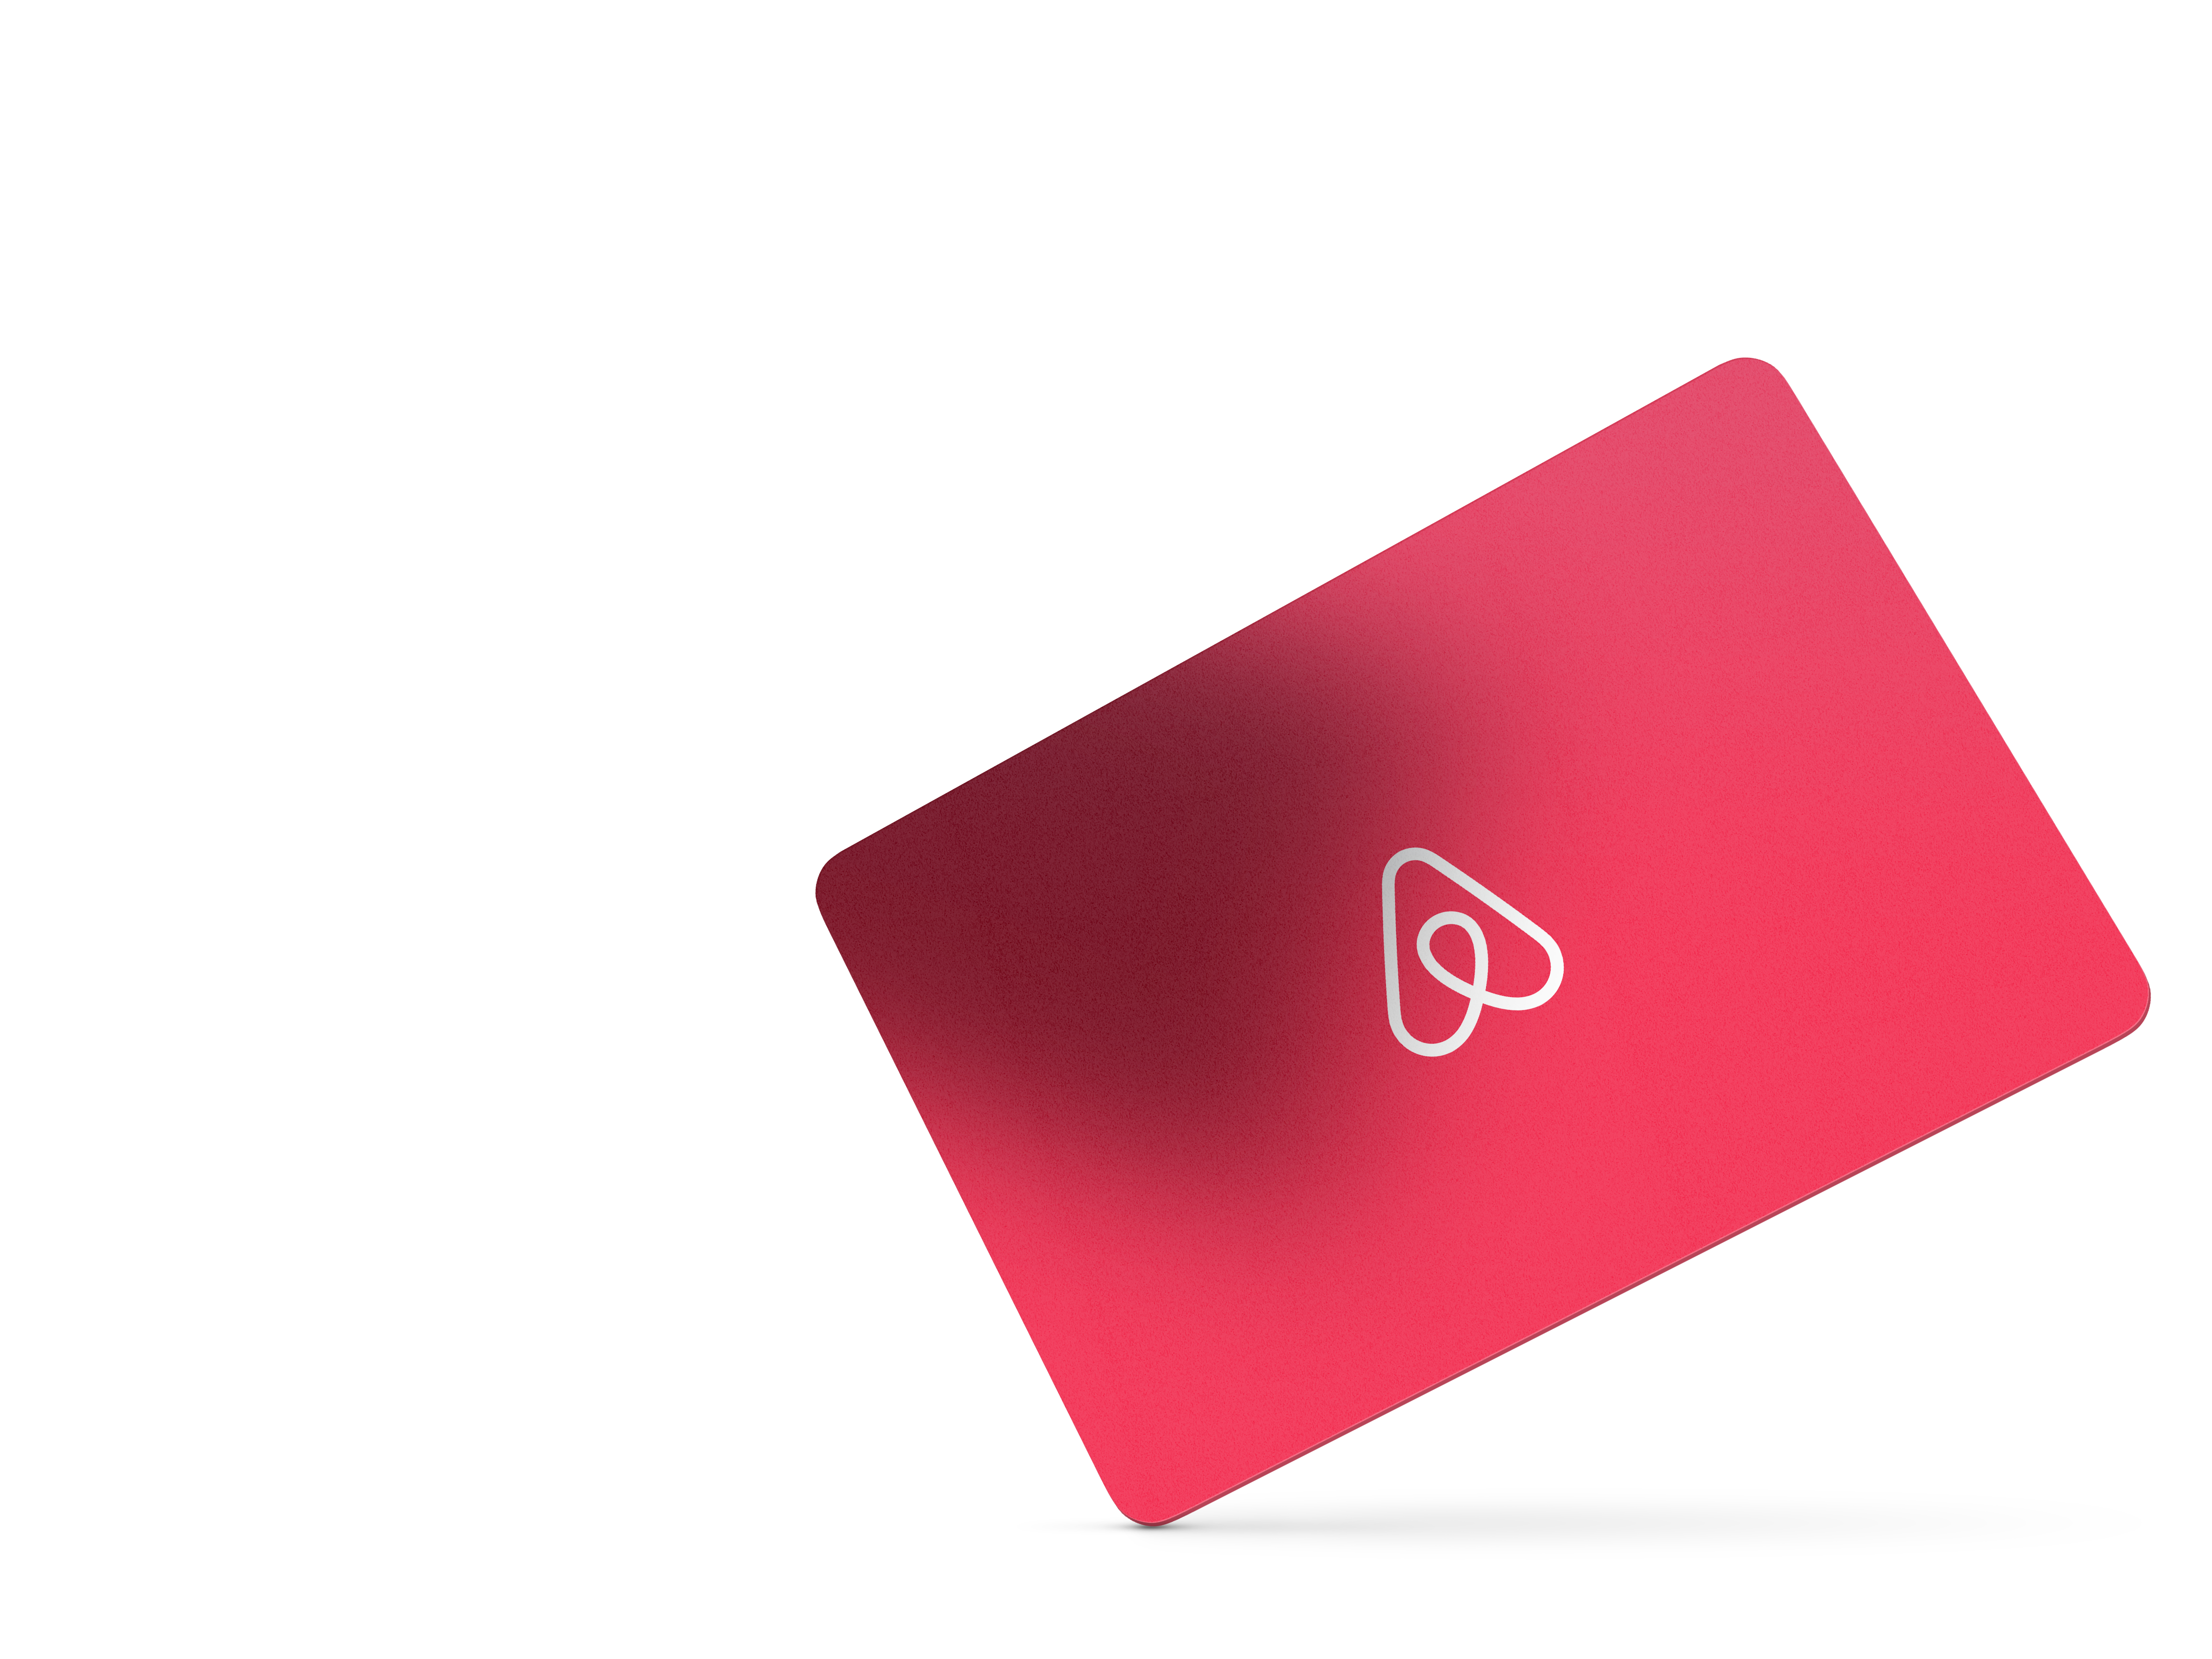 🥇100 USD Gift Card (USA) (Airbnb)